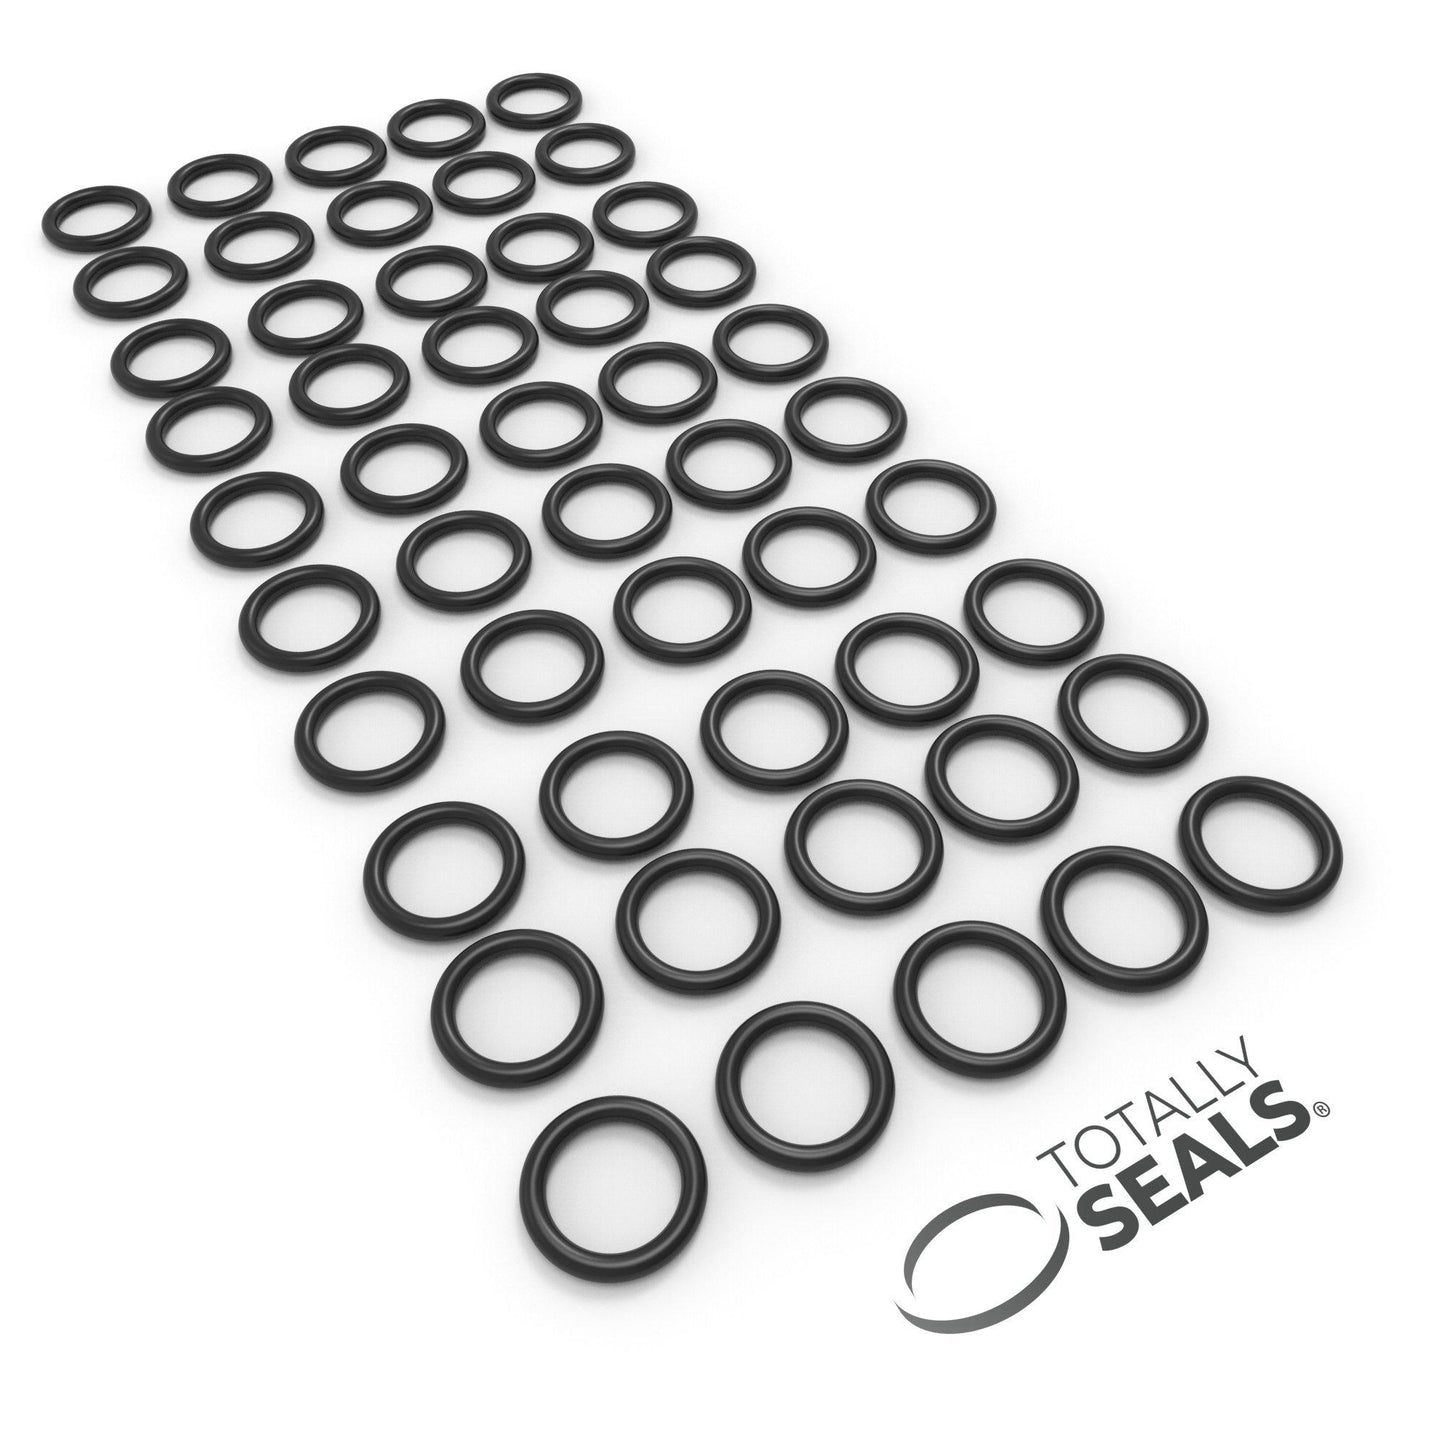 17mm x 1.5mm (20mm OD) Nitrile O-Rings - Totally Seals®